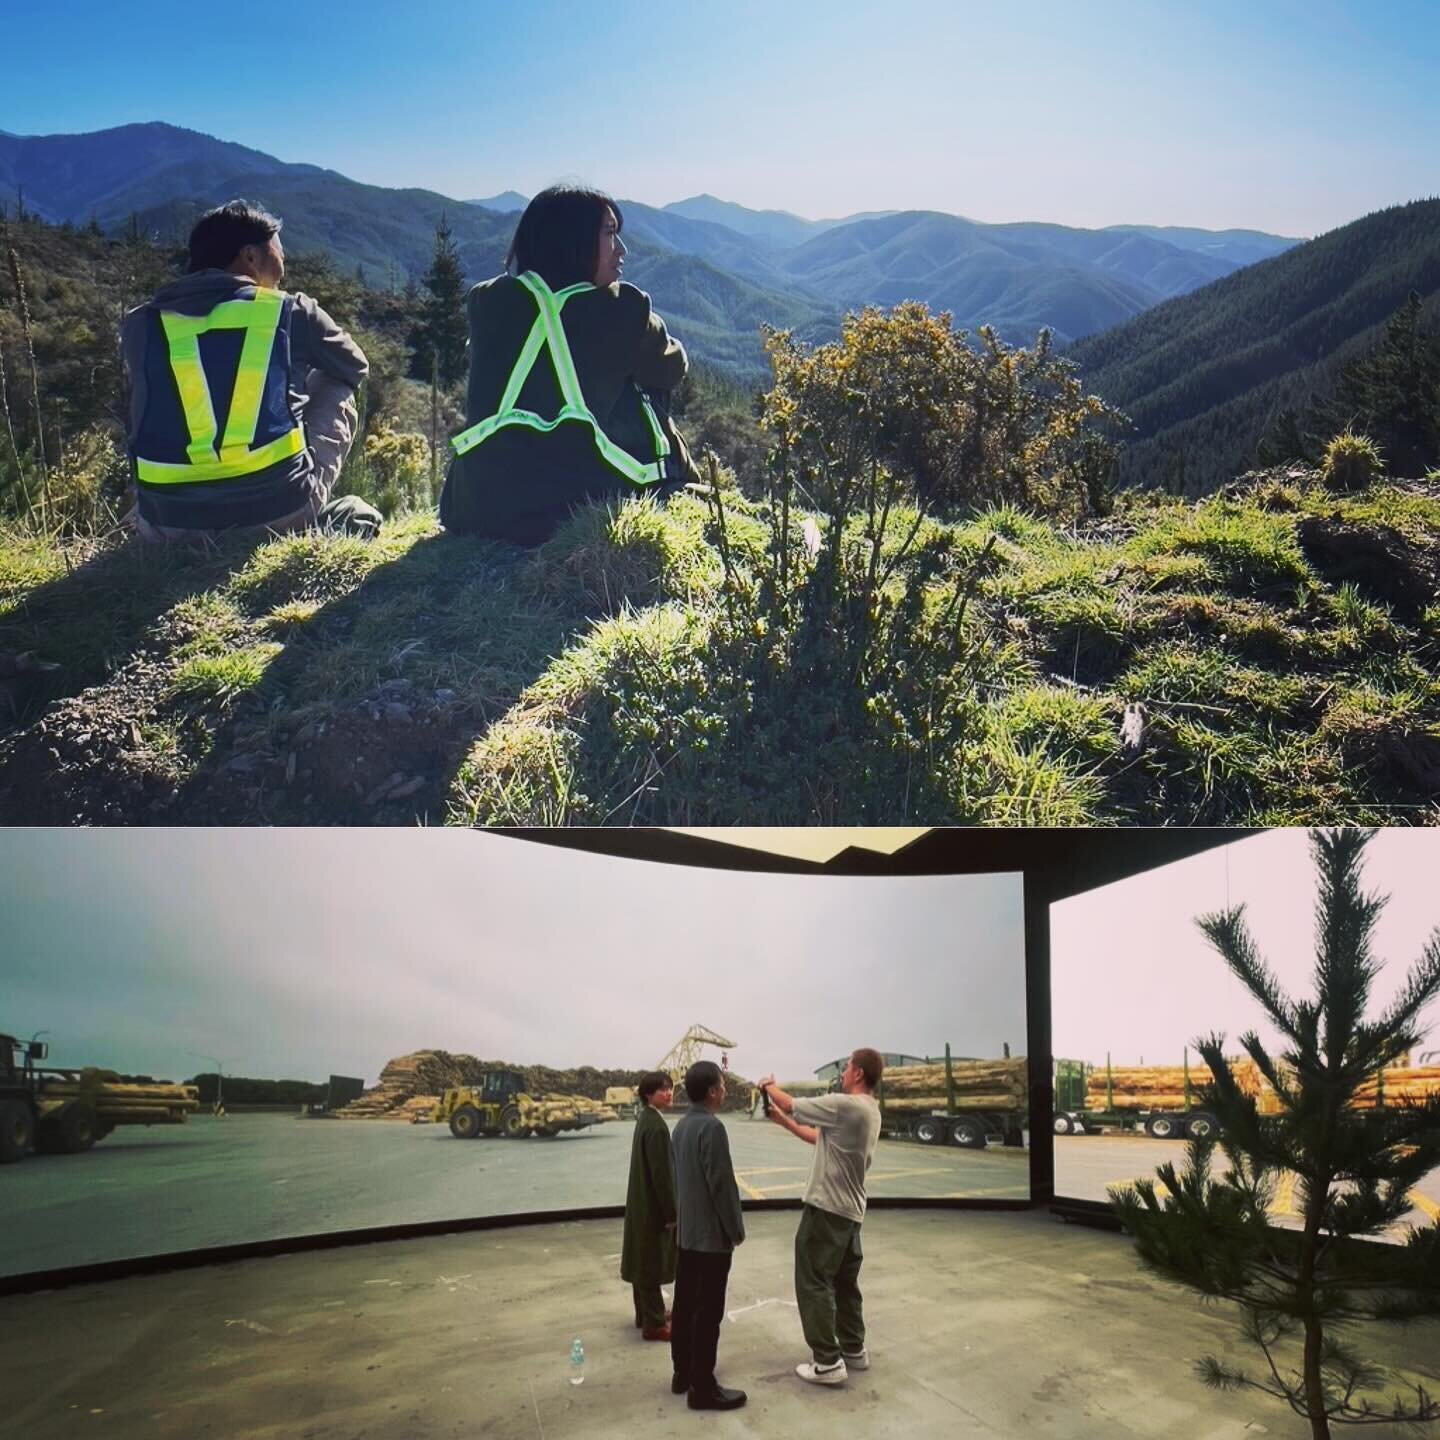 BTS from November Shoot in Japan 🇯🇵&amp; New Zealand🇳🇿

Backgrounds were captured in South Island, then mapped into volume studio for Talent shoot in Tokyo. A delicate and technically challenging process that created a terrific result! 
.
Filmrea